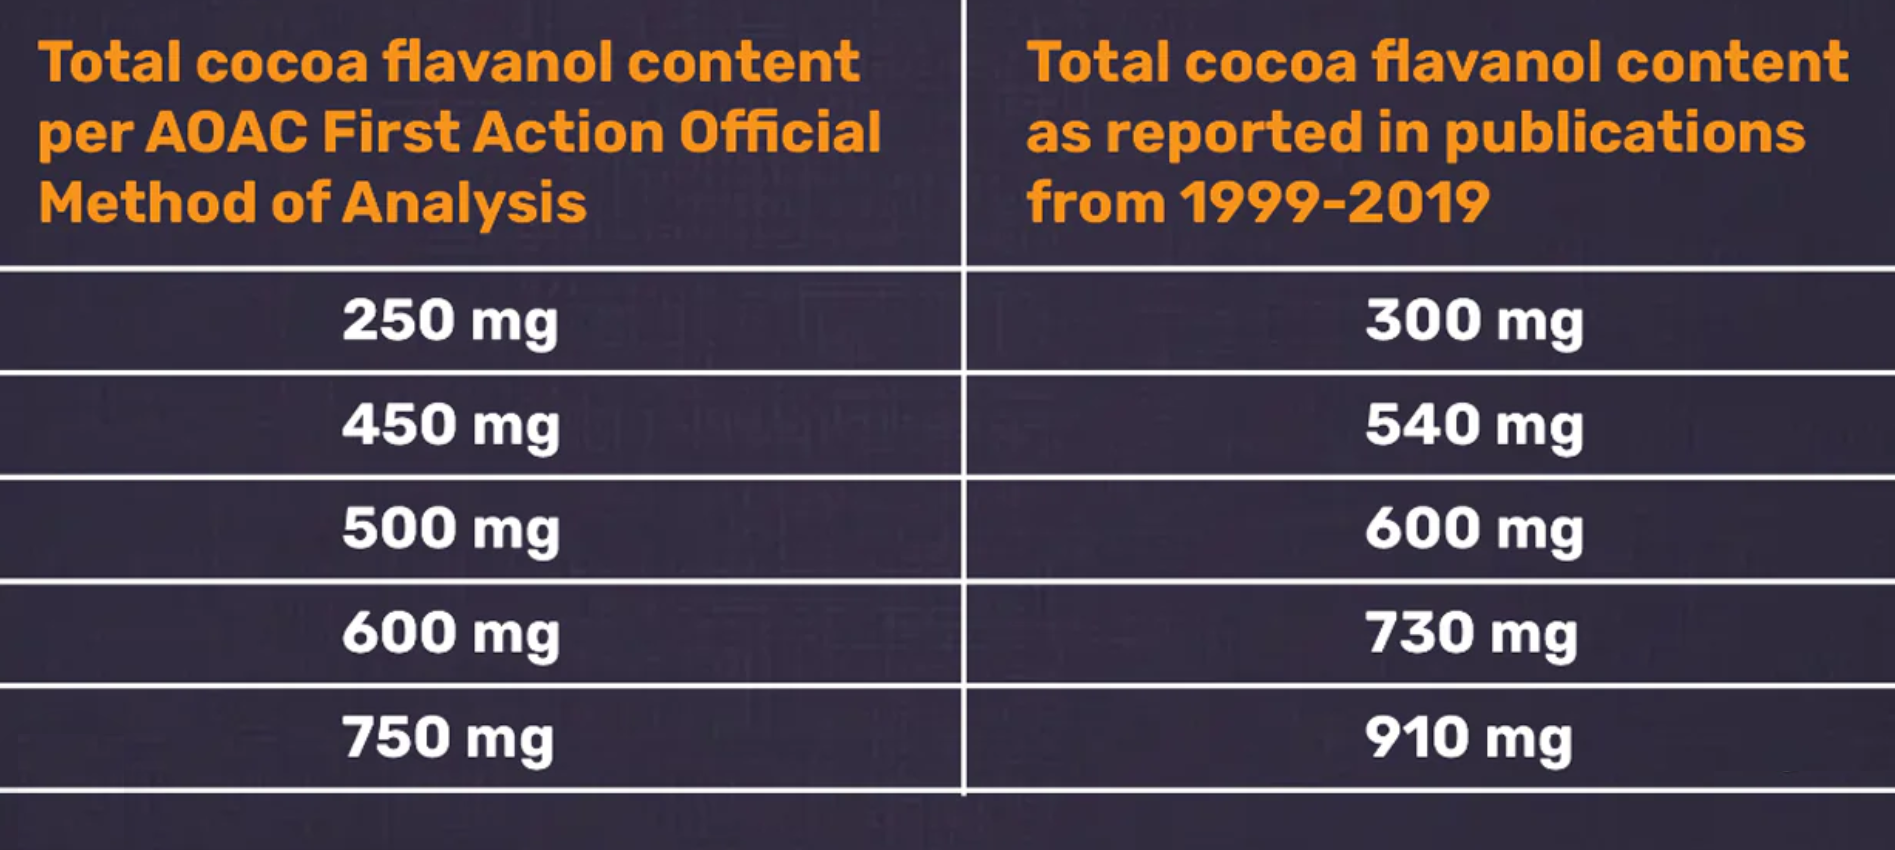 Cocoa Flavanol content per AOAC First Action Official Method of Analysis